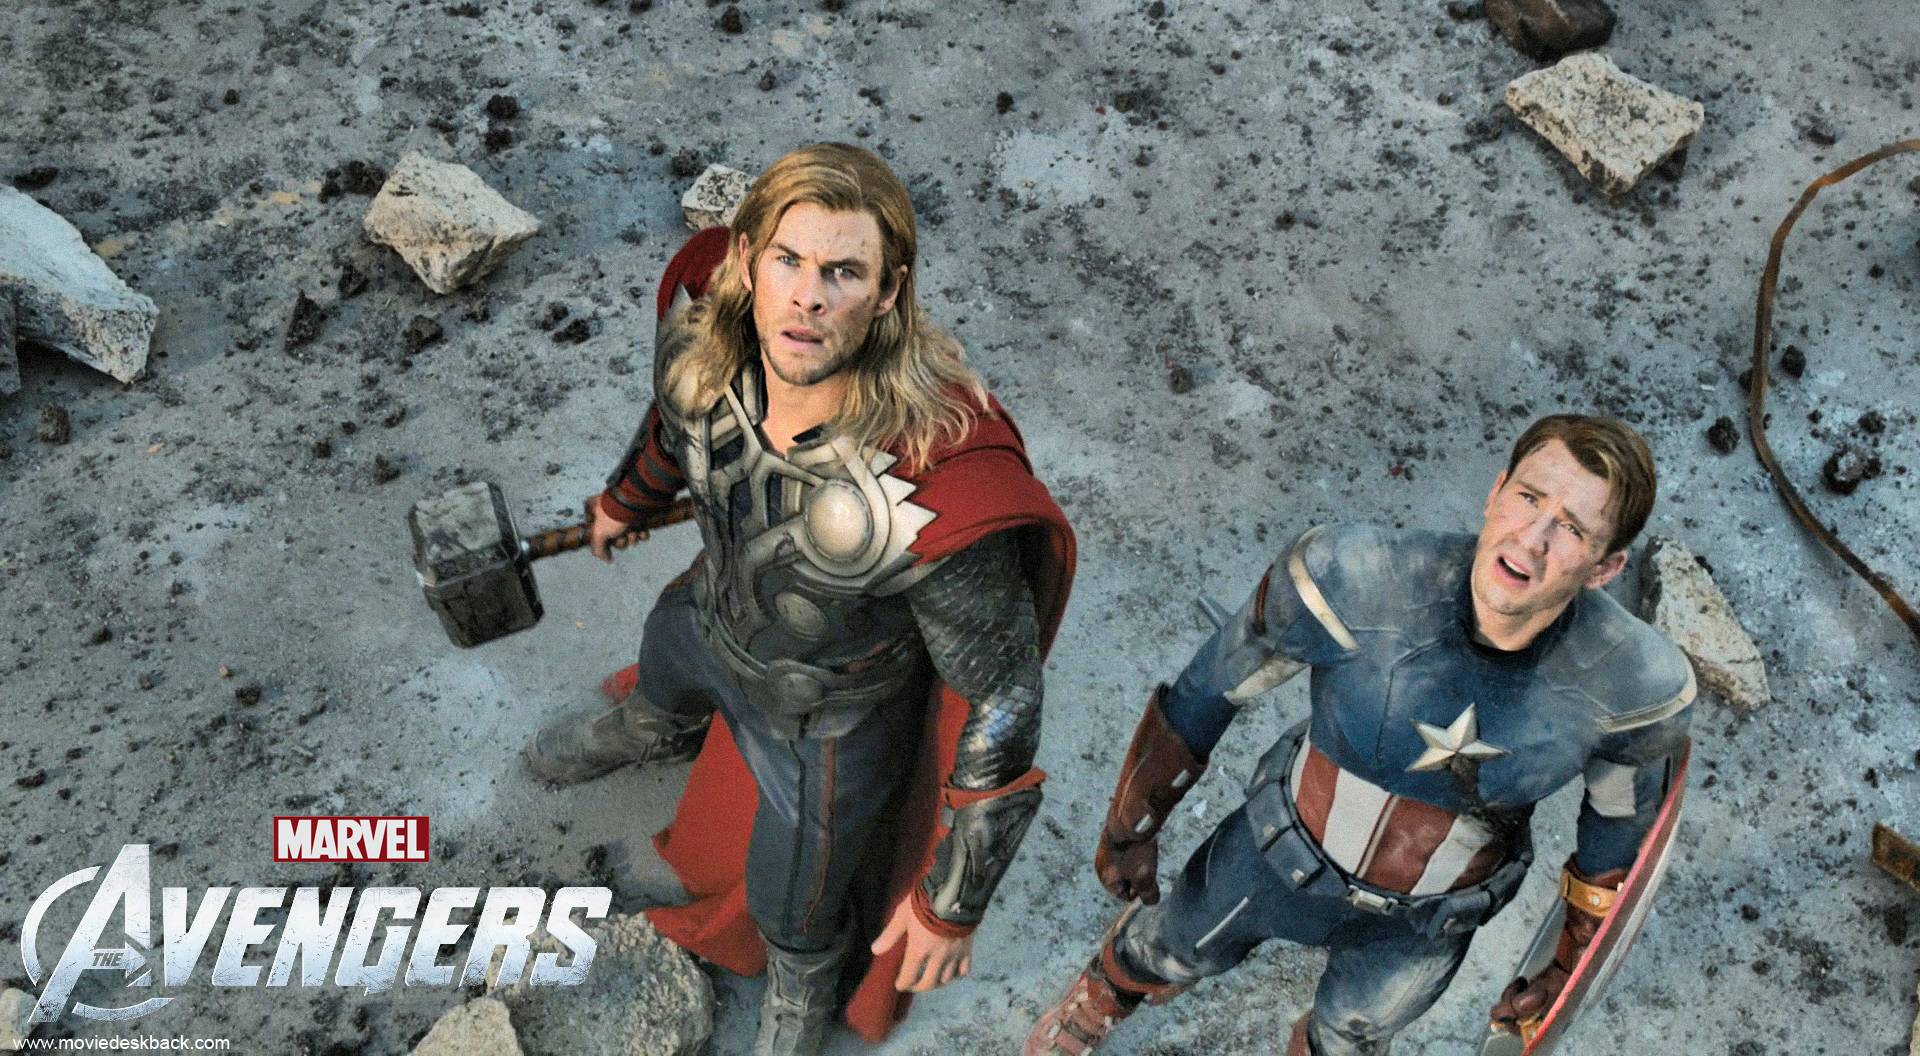 The Avengers (2012) Thor and Captain America